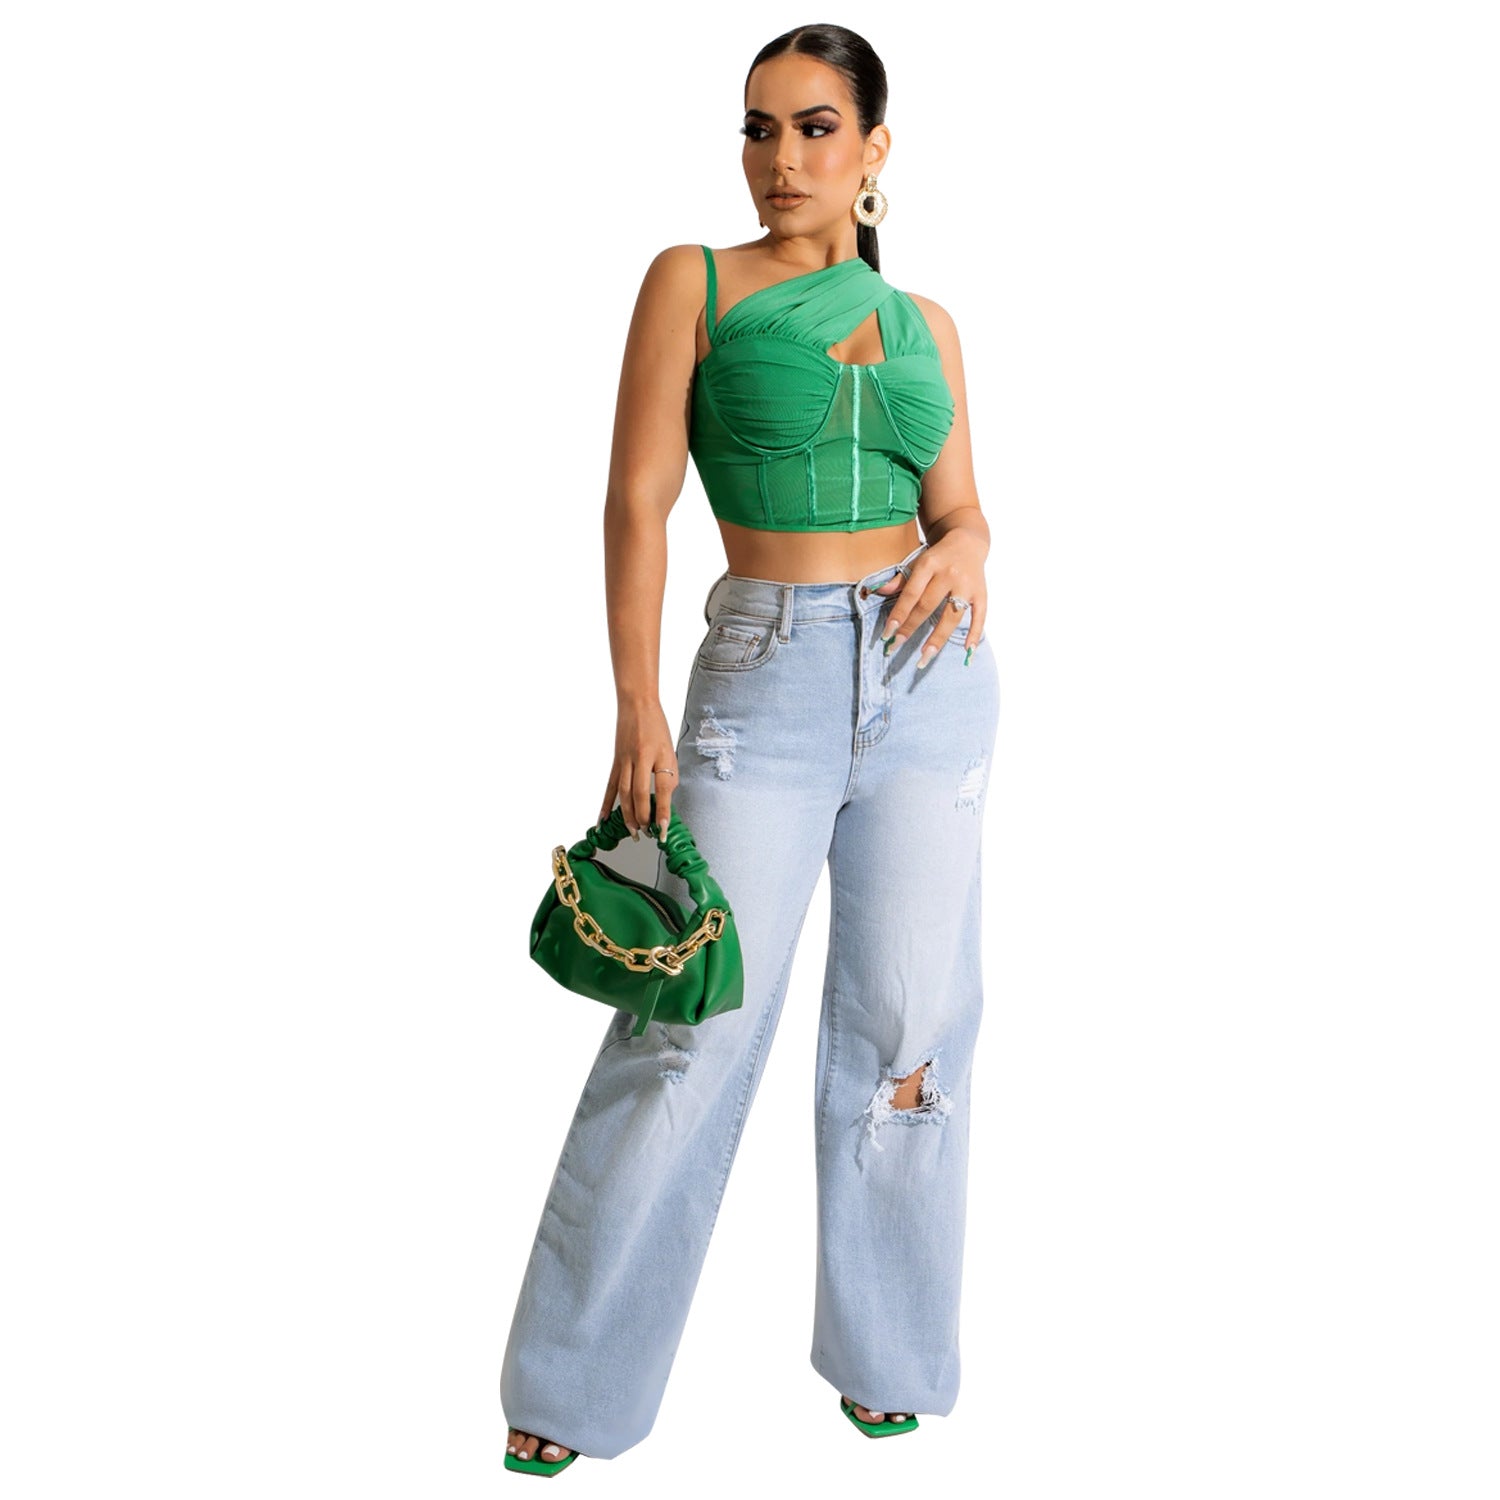 Women's Mesh See-Through Cropped Slanted Shoulder Top apparels & accessories